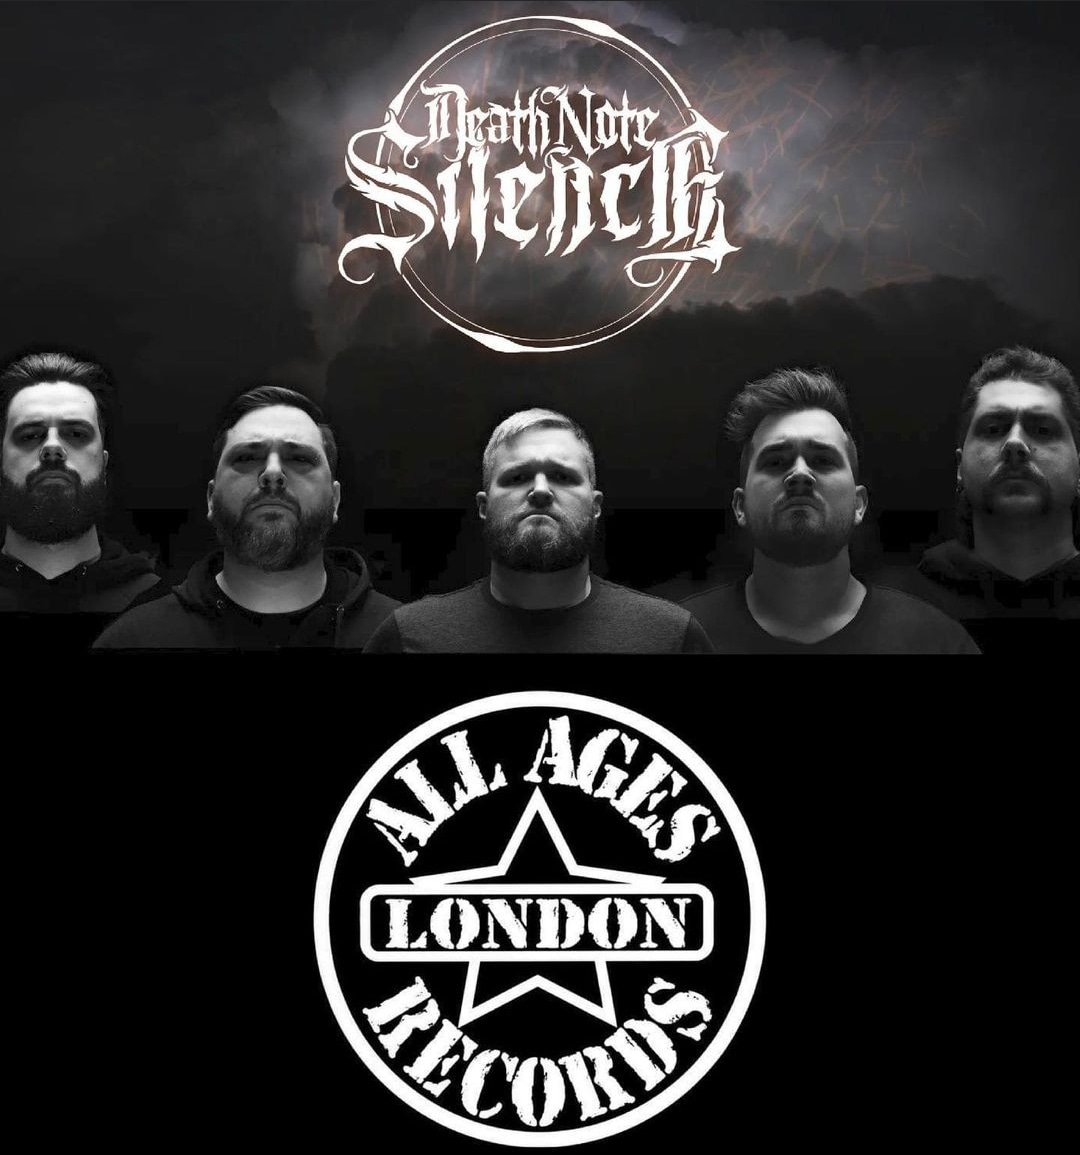 We are so proud, Our music will fly over London real soon!

#deathnotesilence #deathcore #metalcore #heavymetalband #heavymetalcanada #canadianmusic #posthardcoremetal #metalcore2022 #deathcore2022 #kingsiderecords #terrorcrewproductions